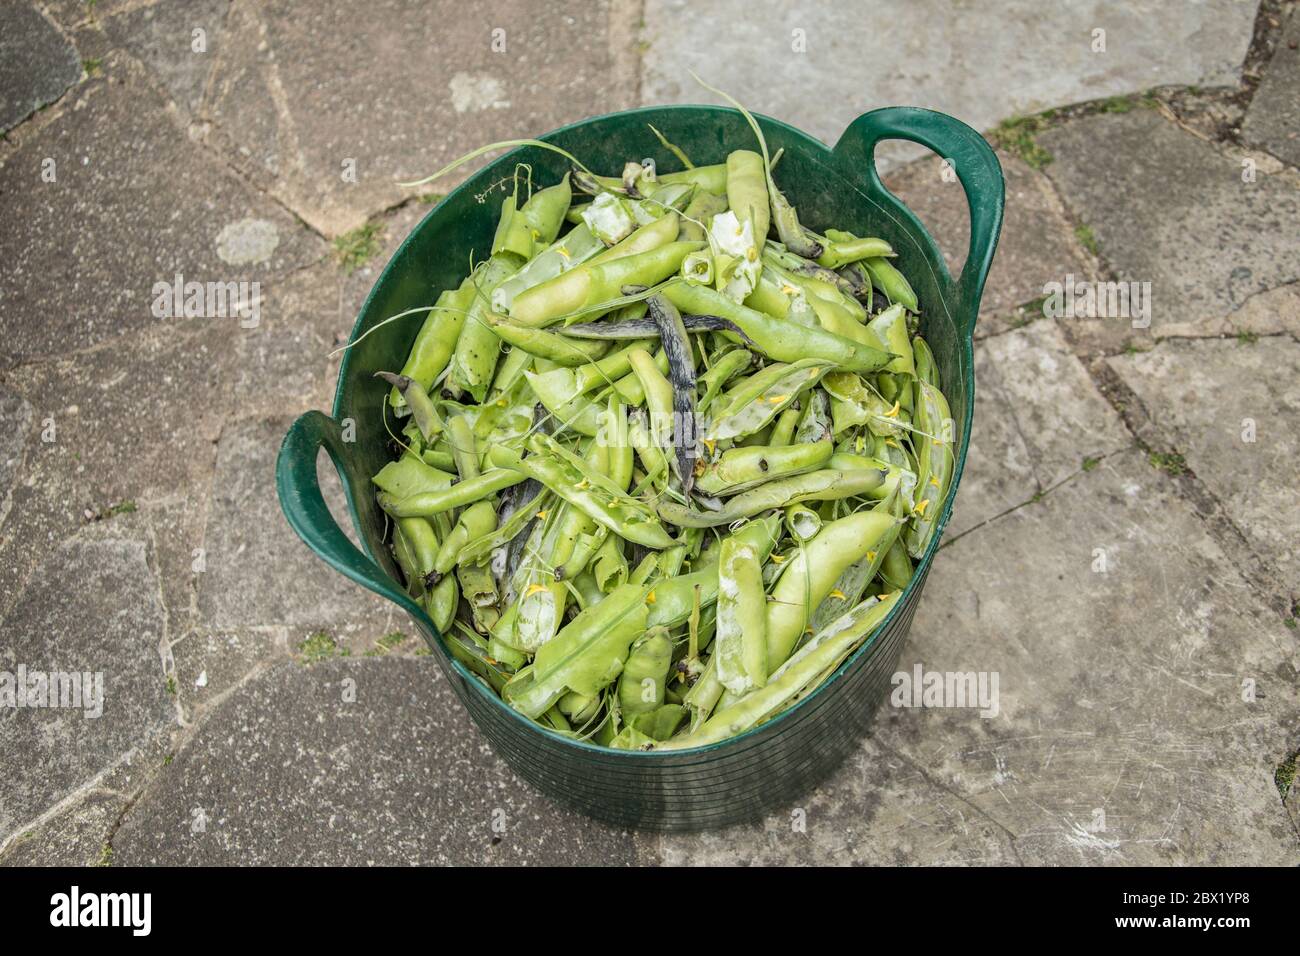 London, UK. 4 June, 2020. A trug full of empty broad bean pods after shelling. David Rowe/Alamy Stock image. Stock Photo